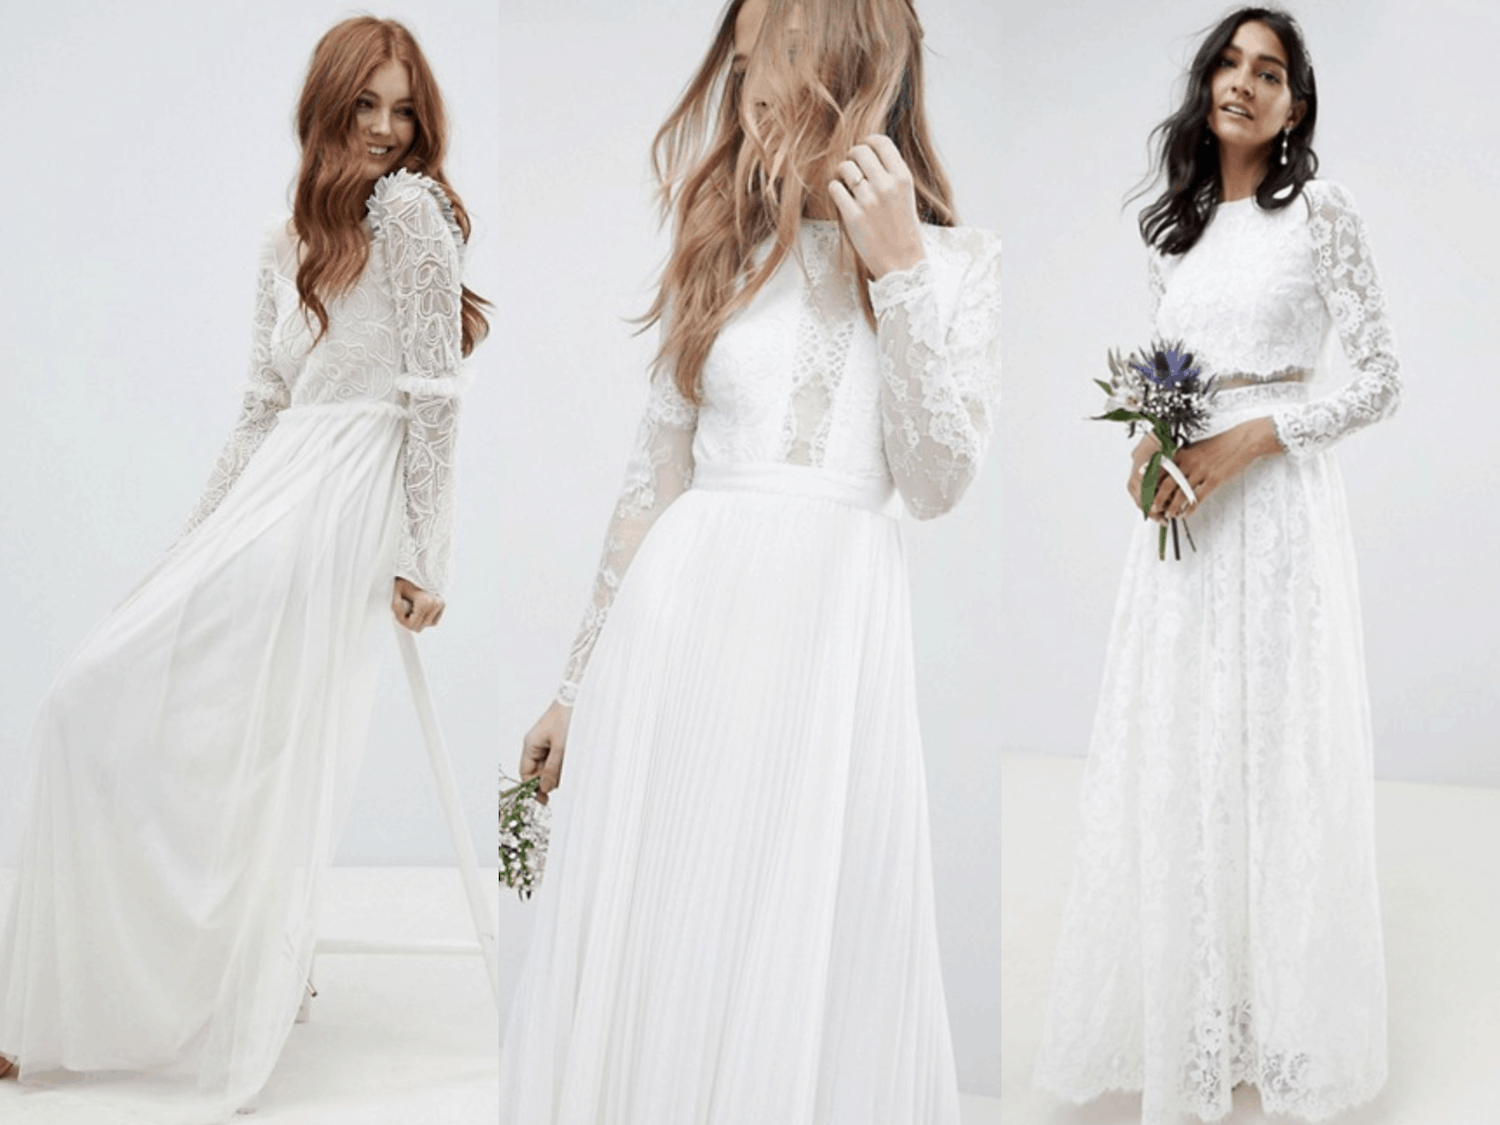 20 Cheap Affordable Bridal Gowns And Wedding Dresses From Asos For